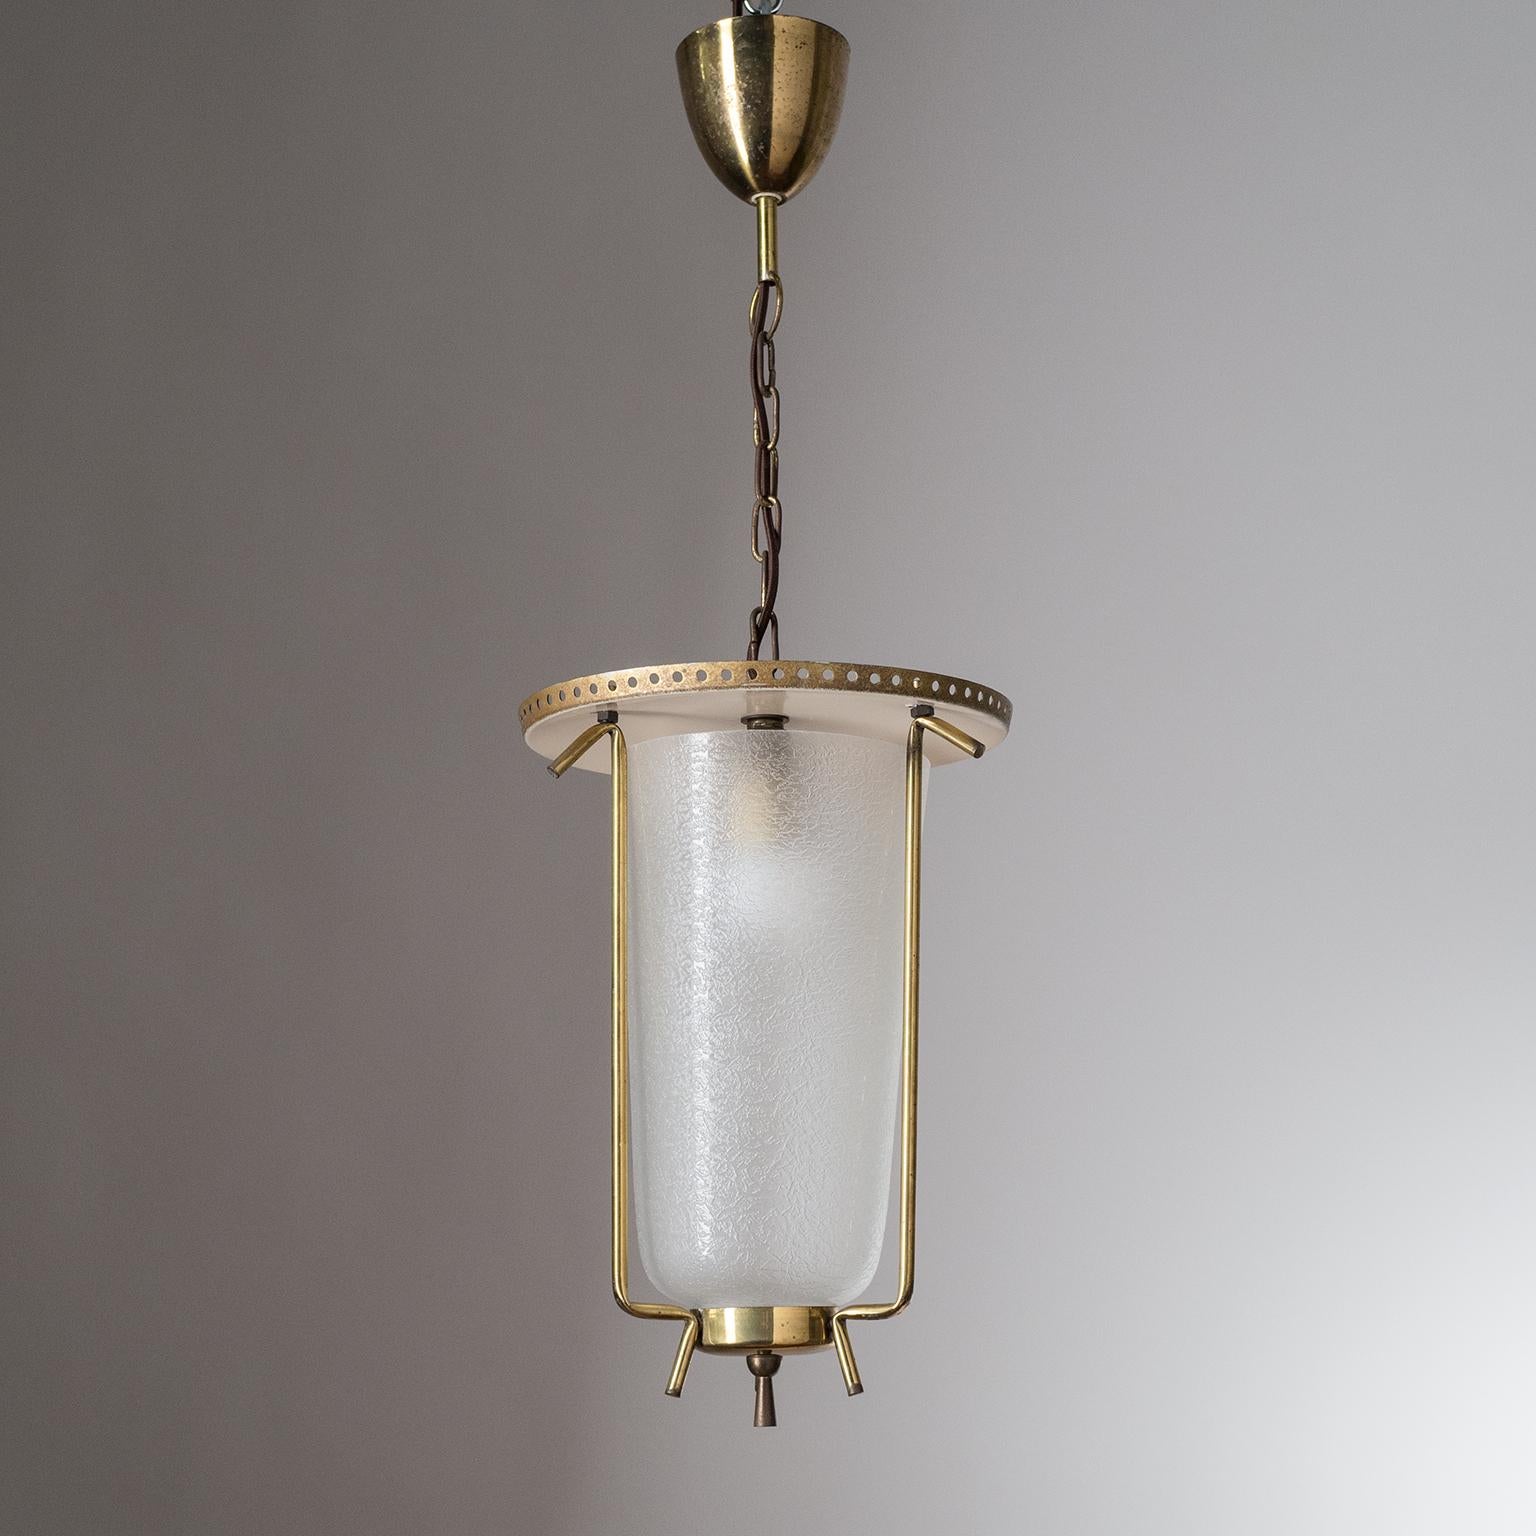 Charming mid-century brass and glass lantern from Austria, circa 1950. A perforated lacquered aluminum shade sits atop a textured glass diffuser. Very nice original condition with some patina on the brass and light wear to the top of the lacquered